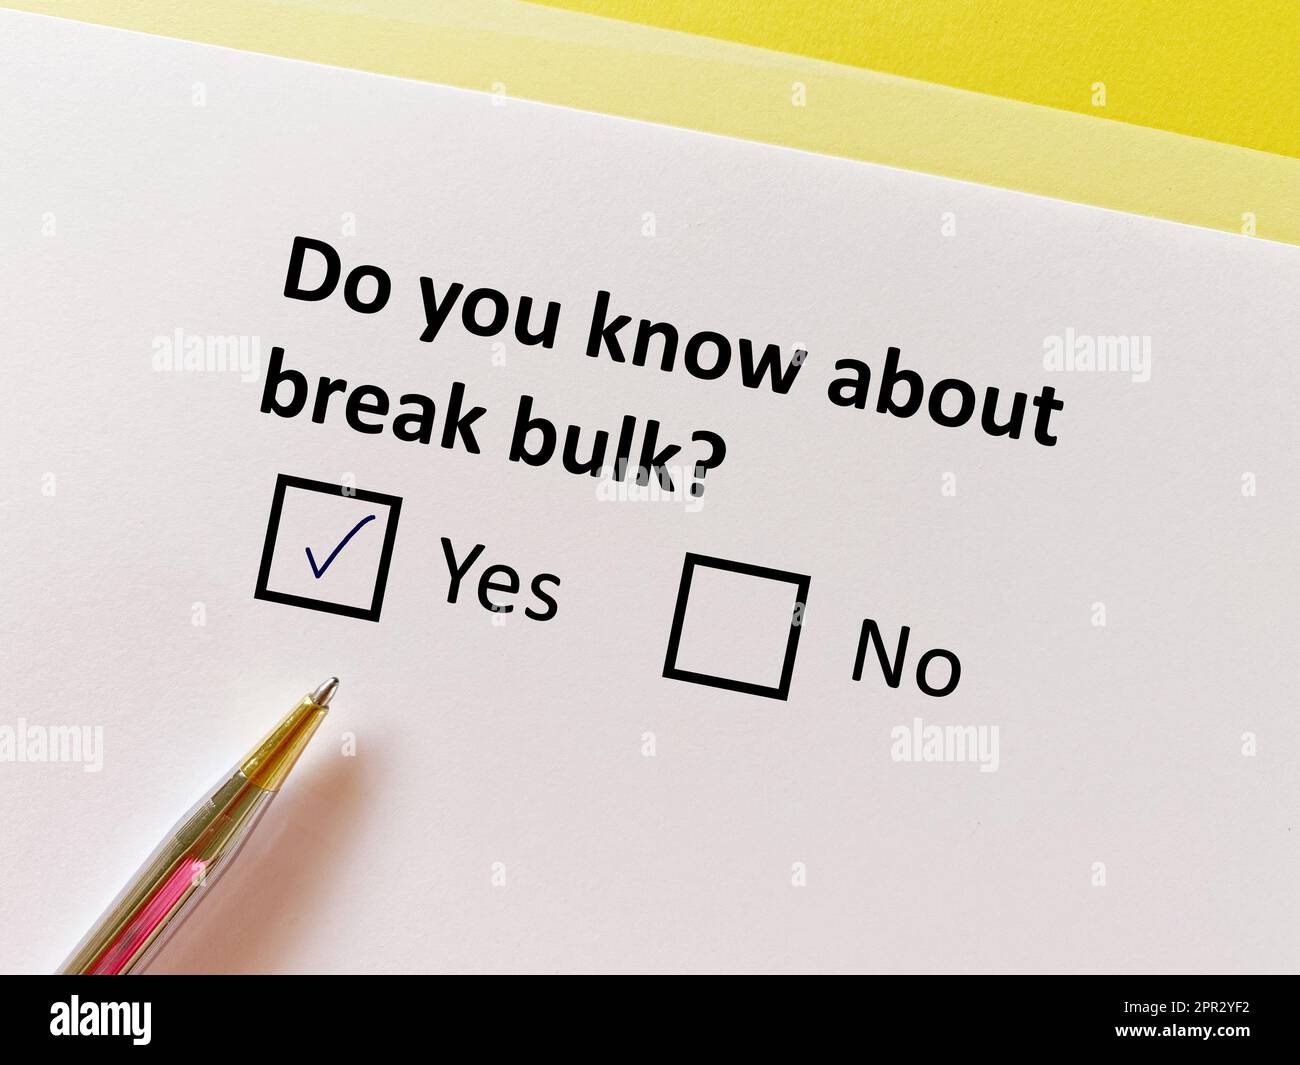 A person is answering question about logistics. He knows about break bulk. Stock Photo